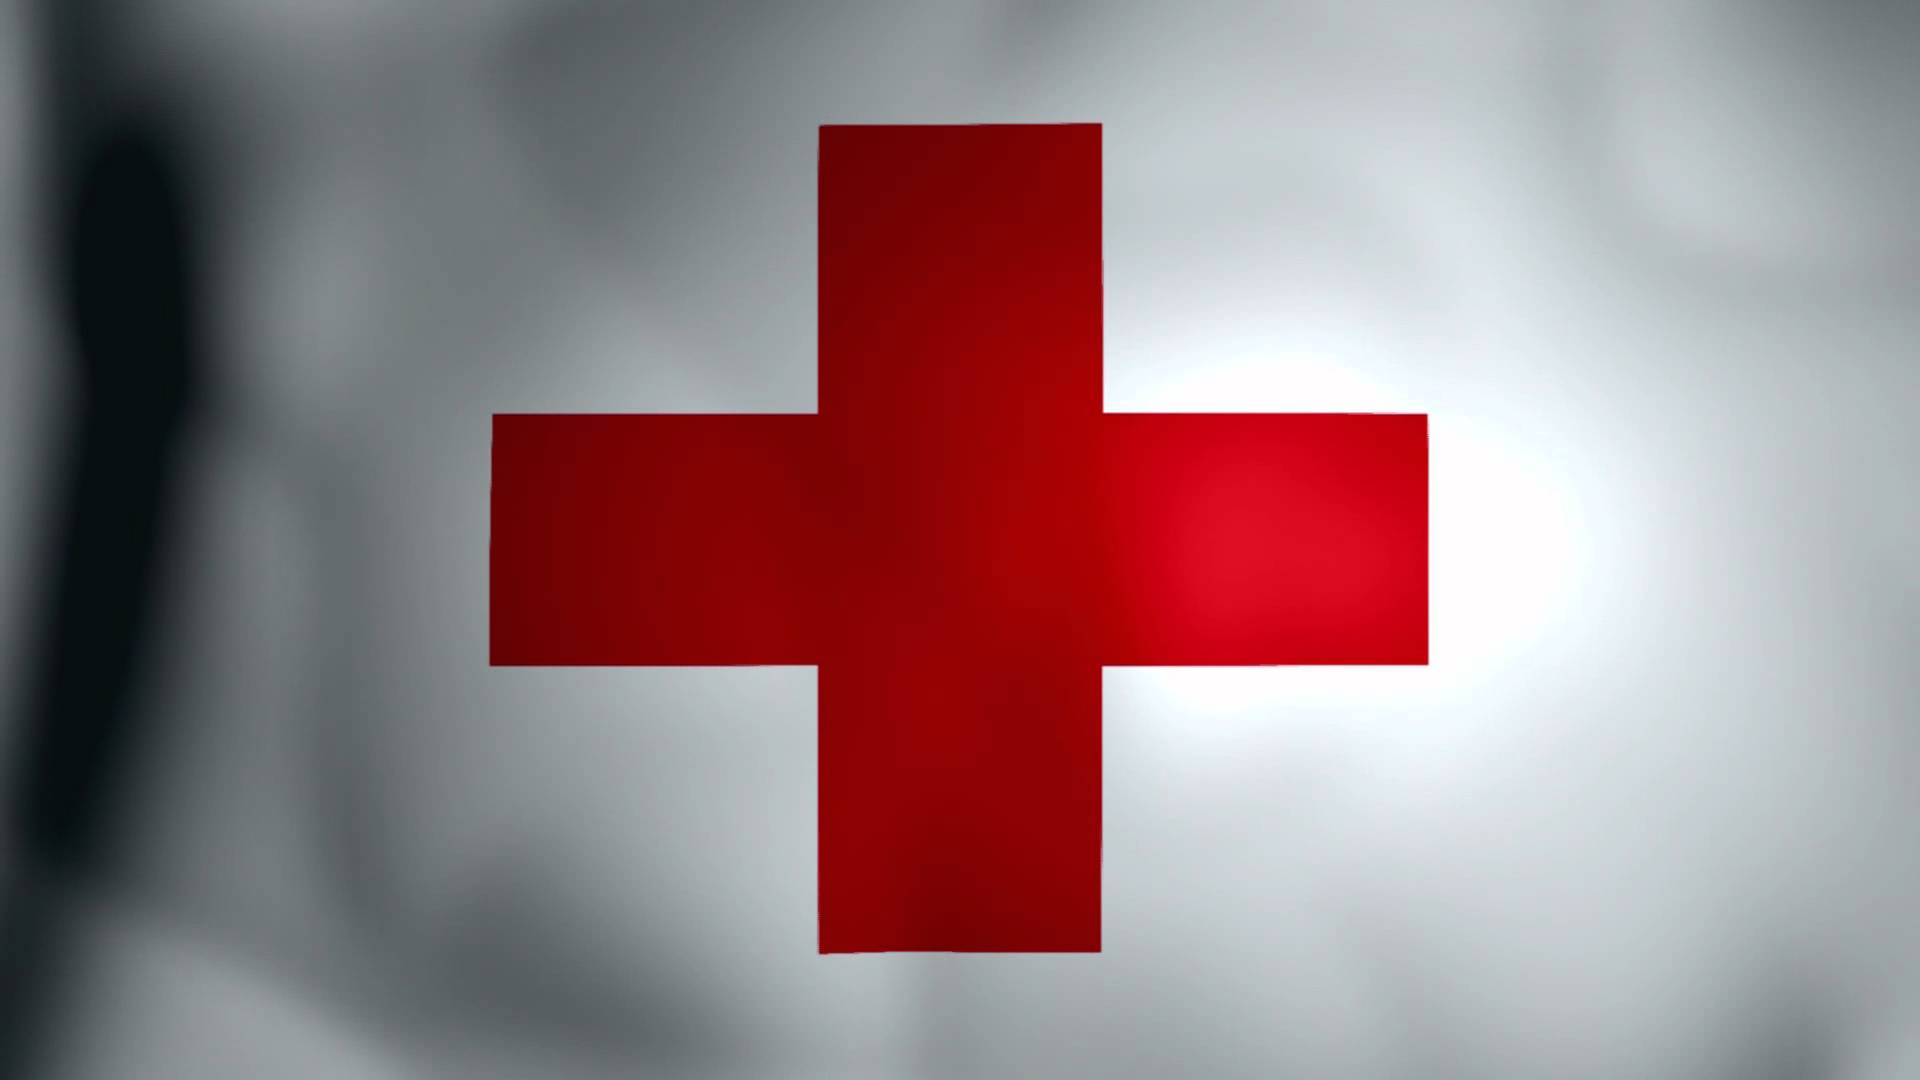 Red Cross Wallpaper (Picture)